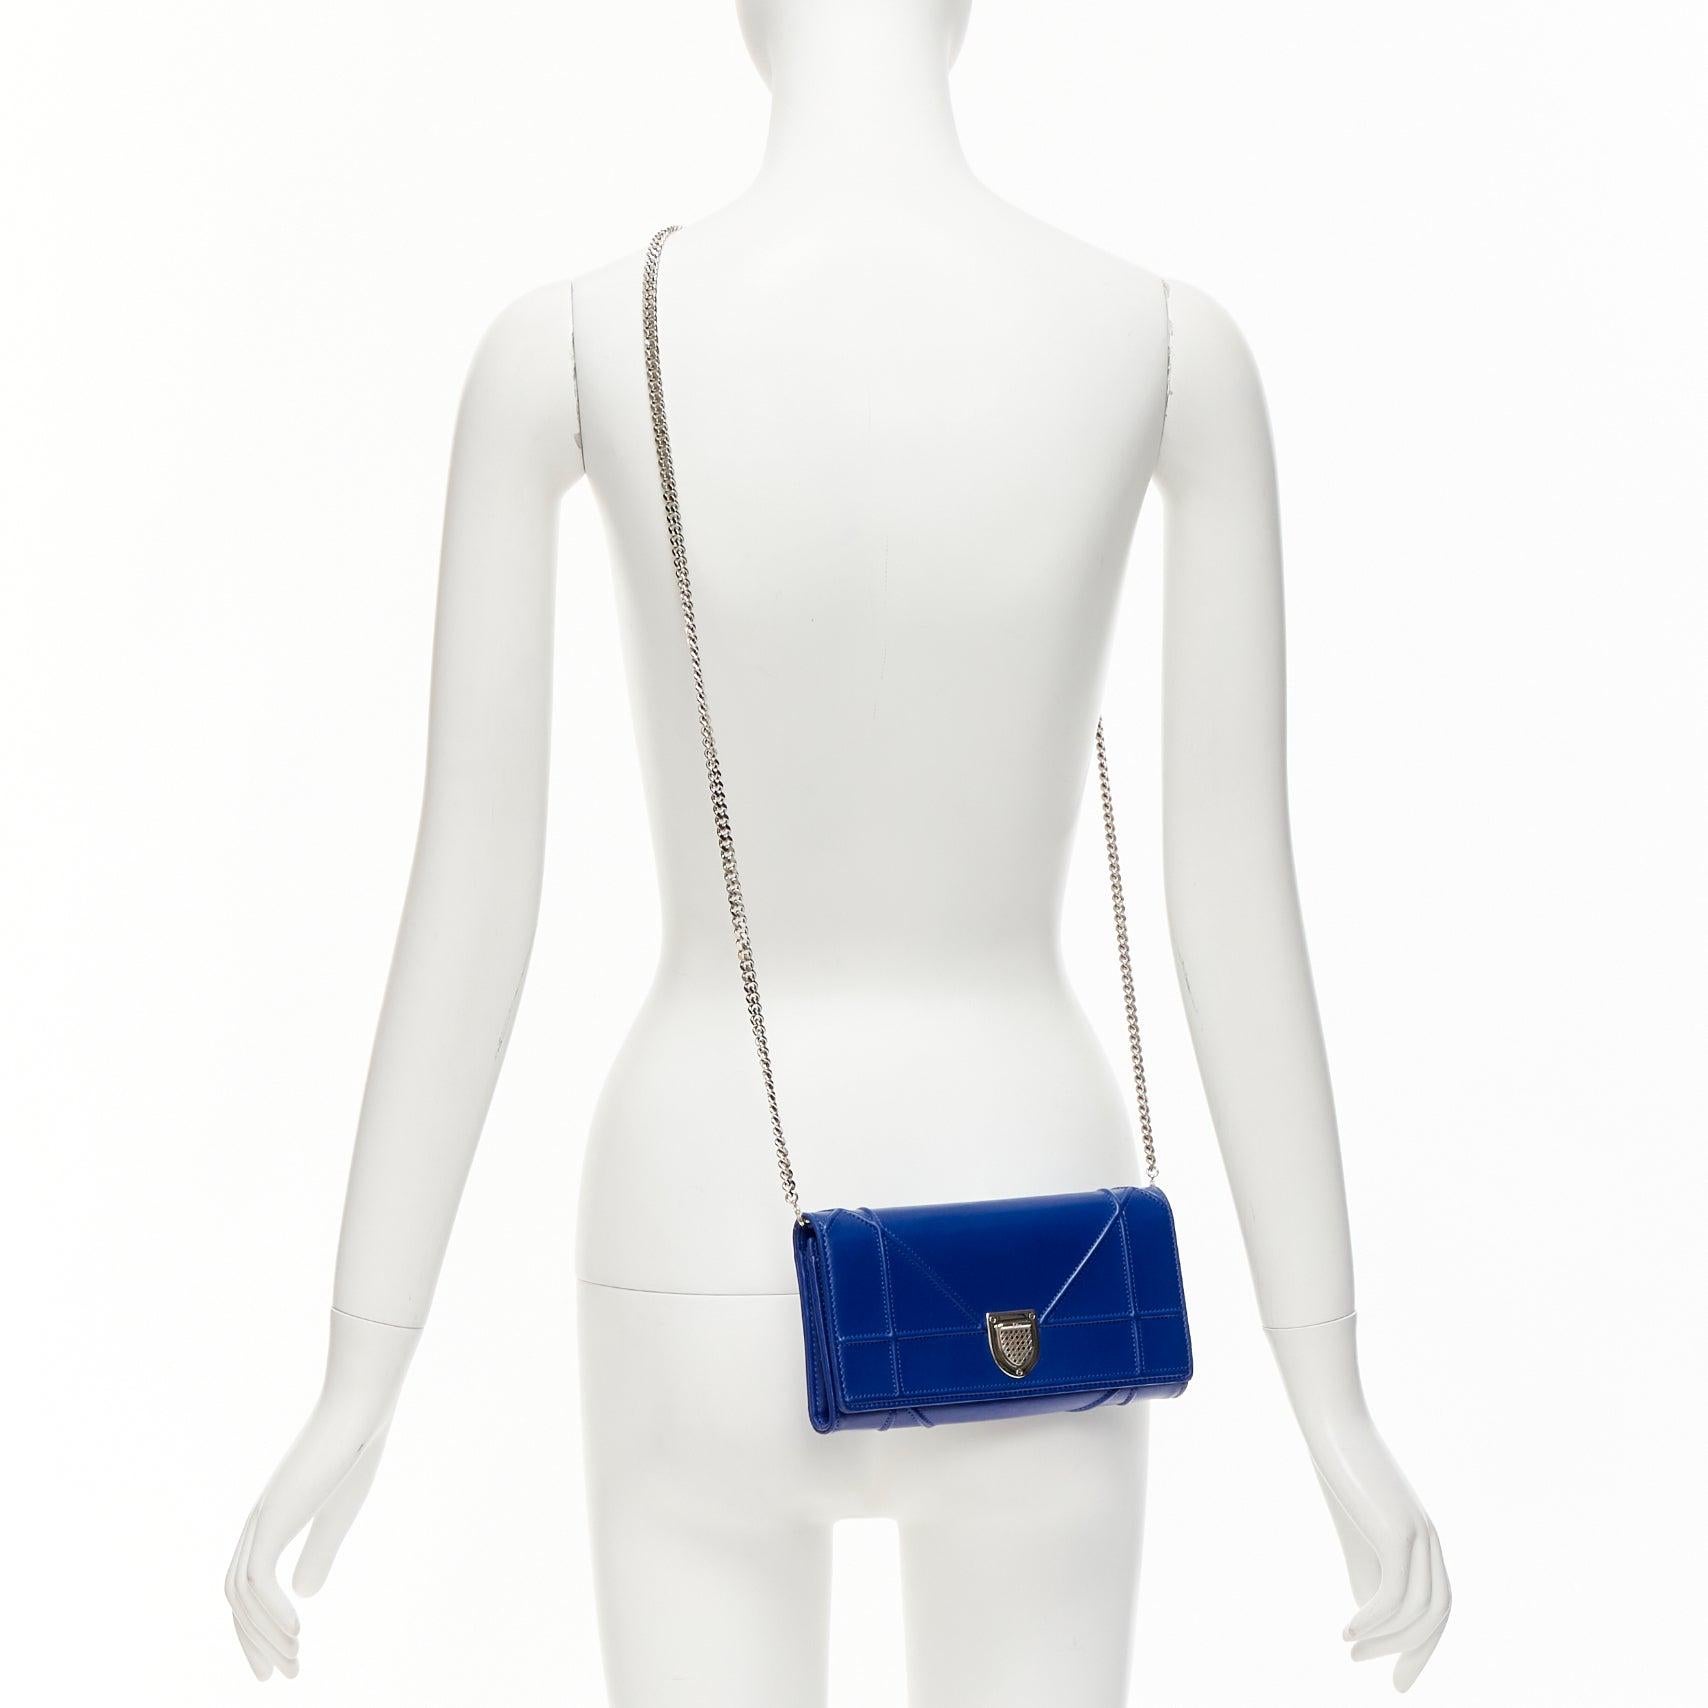 DIOR Diorama cerulean blue quilted crossbody wallet on chain clutch bag
Reference: KYCG/A00031
Brand: Dior
Collection: Diorama
Material: Leather
Color: Blue, Silver
Pattern: Solid
Closure: Snap Buttons
Lining: Blue Leather
Made in: